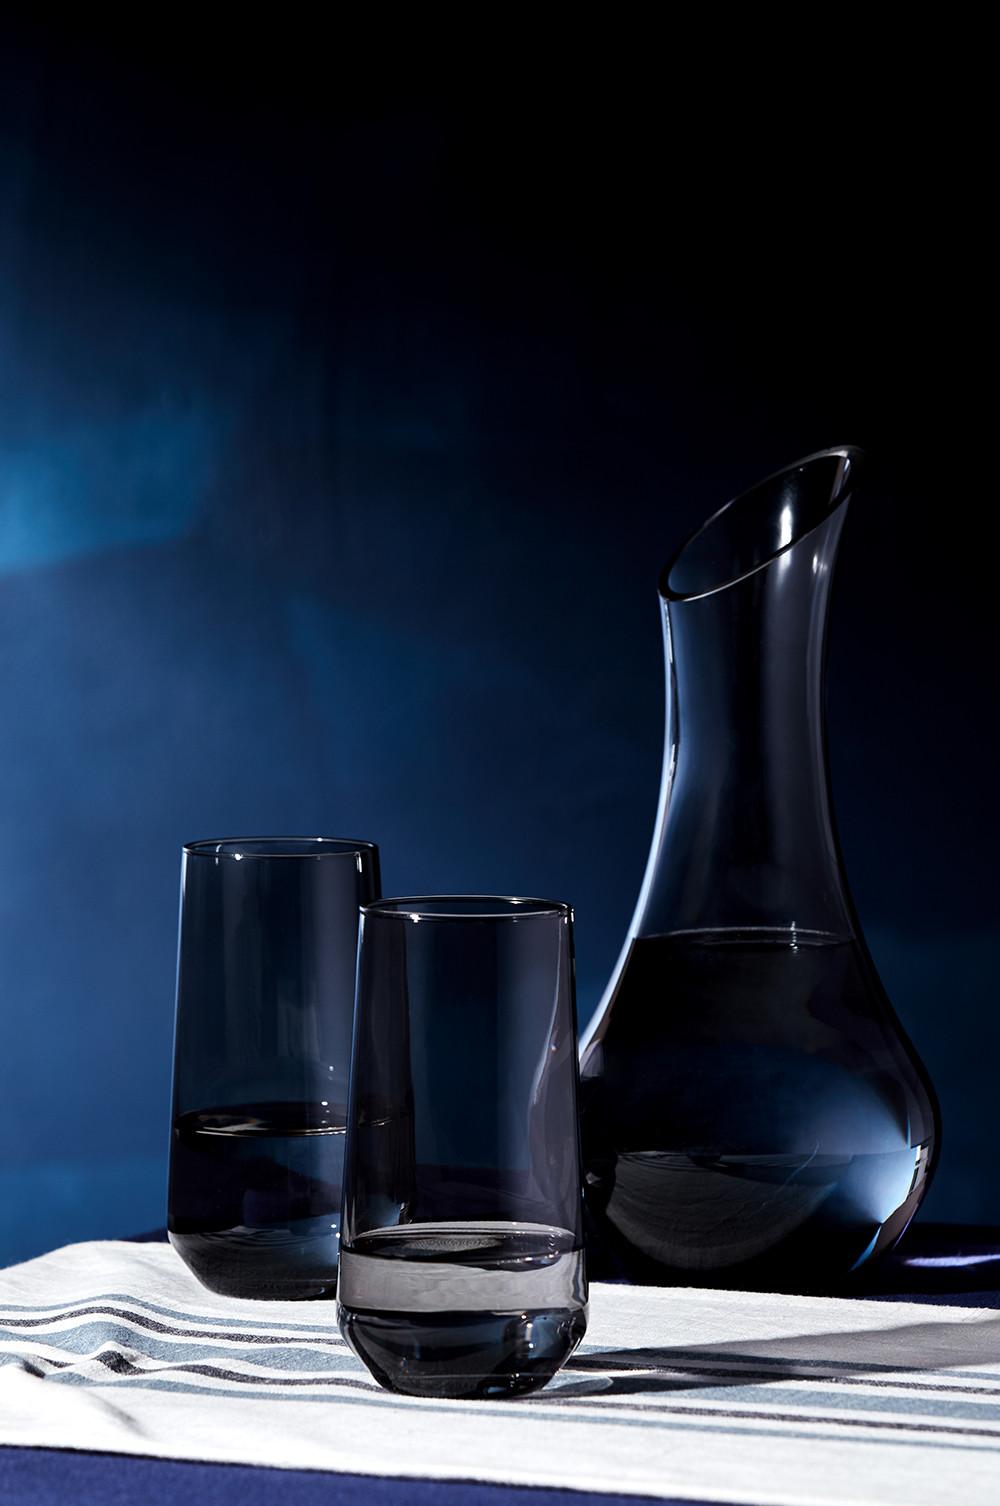 Smoked glasses and jug with blue background